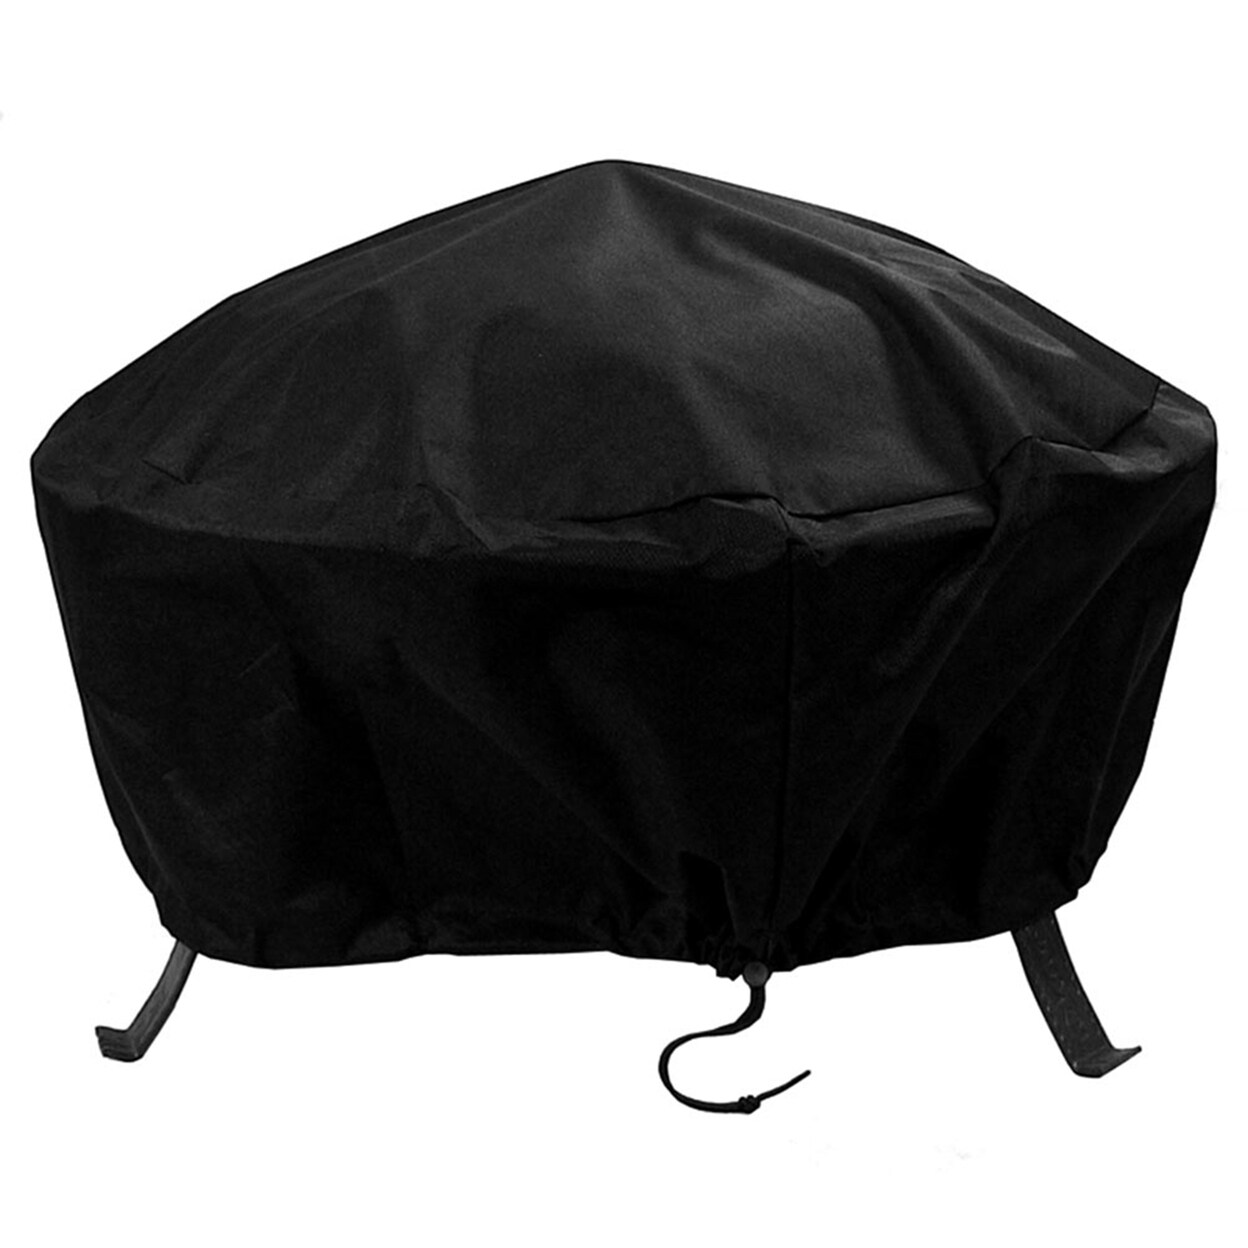 Sunnydaze   36 in Weather-Resistant PVC Round Fire Pit Cover - Black